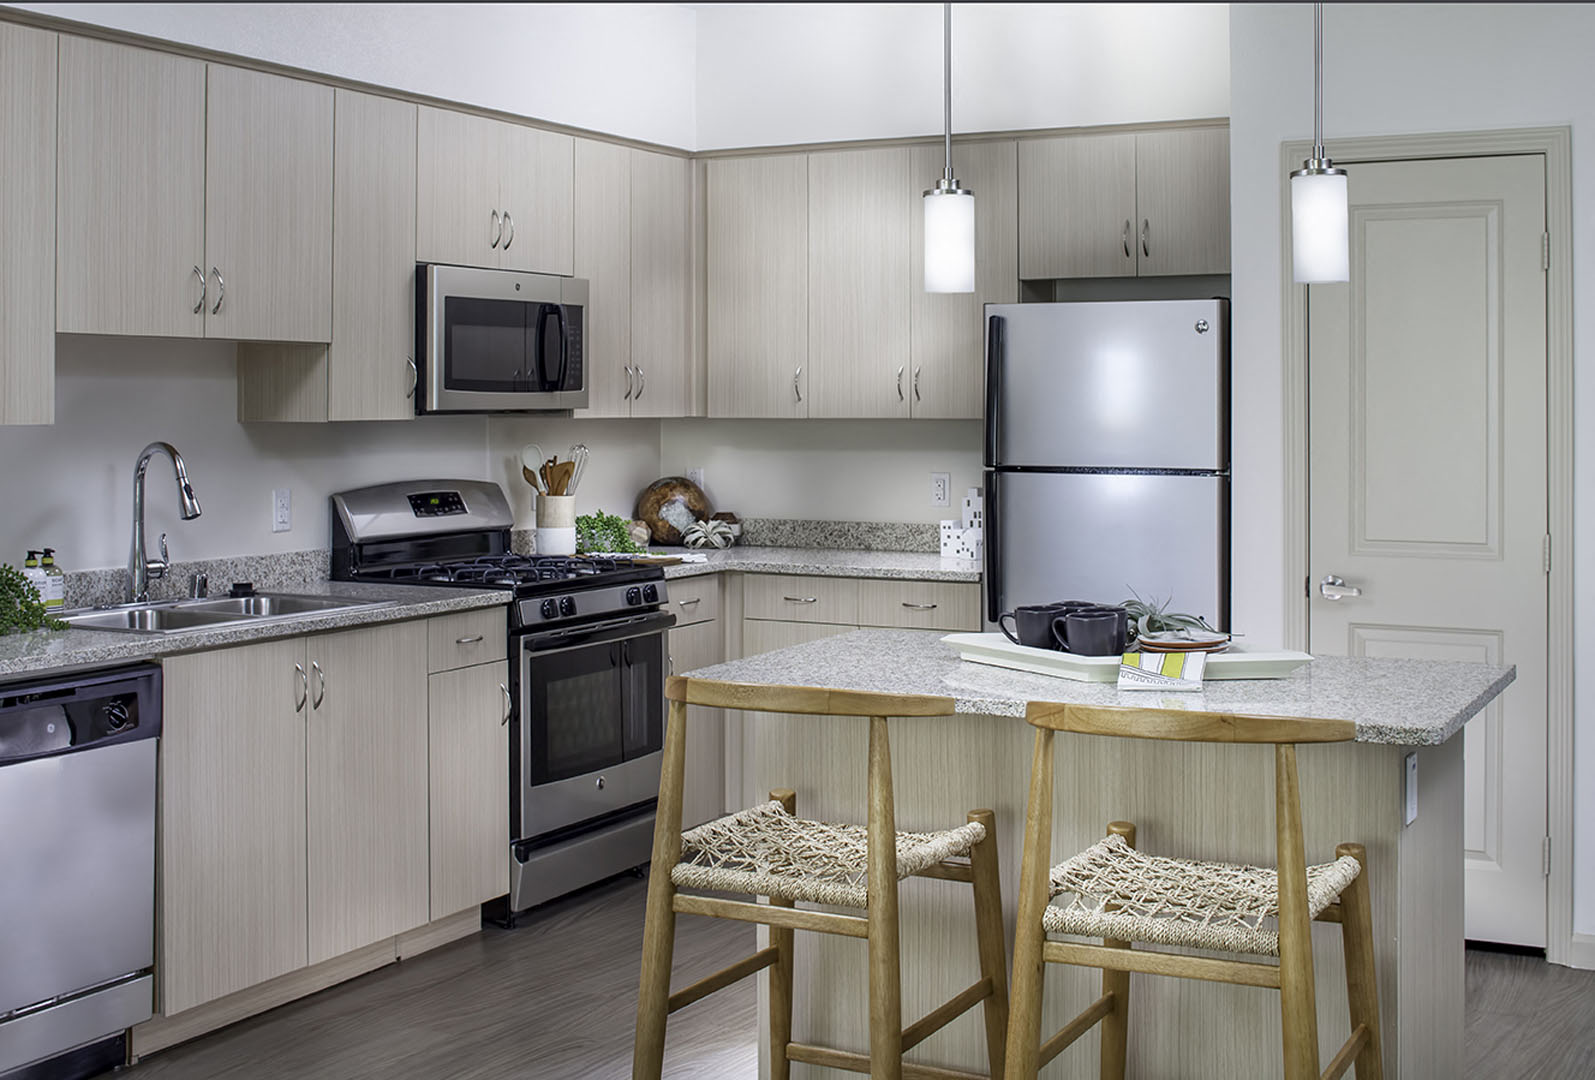 A modern kitchen with a kitchen island at the Pulse Millennia Apartments in Chula Vista, California.